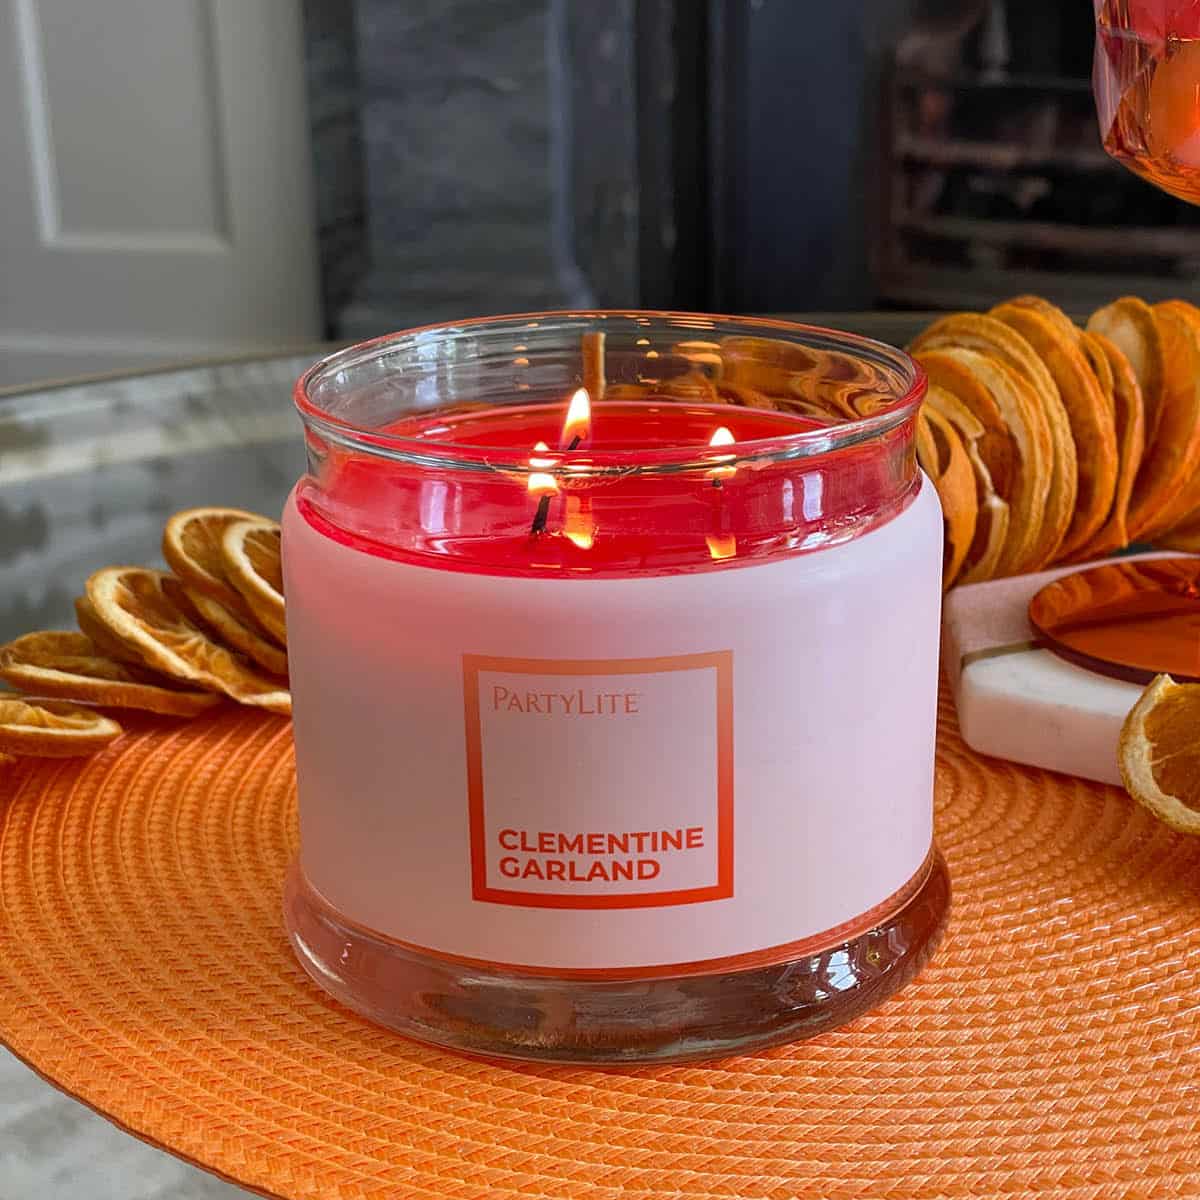 Clementine Garland 3-Wick Jar Candle